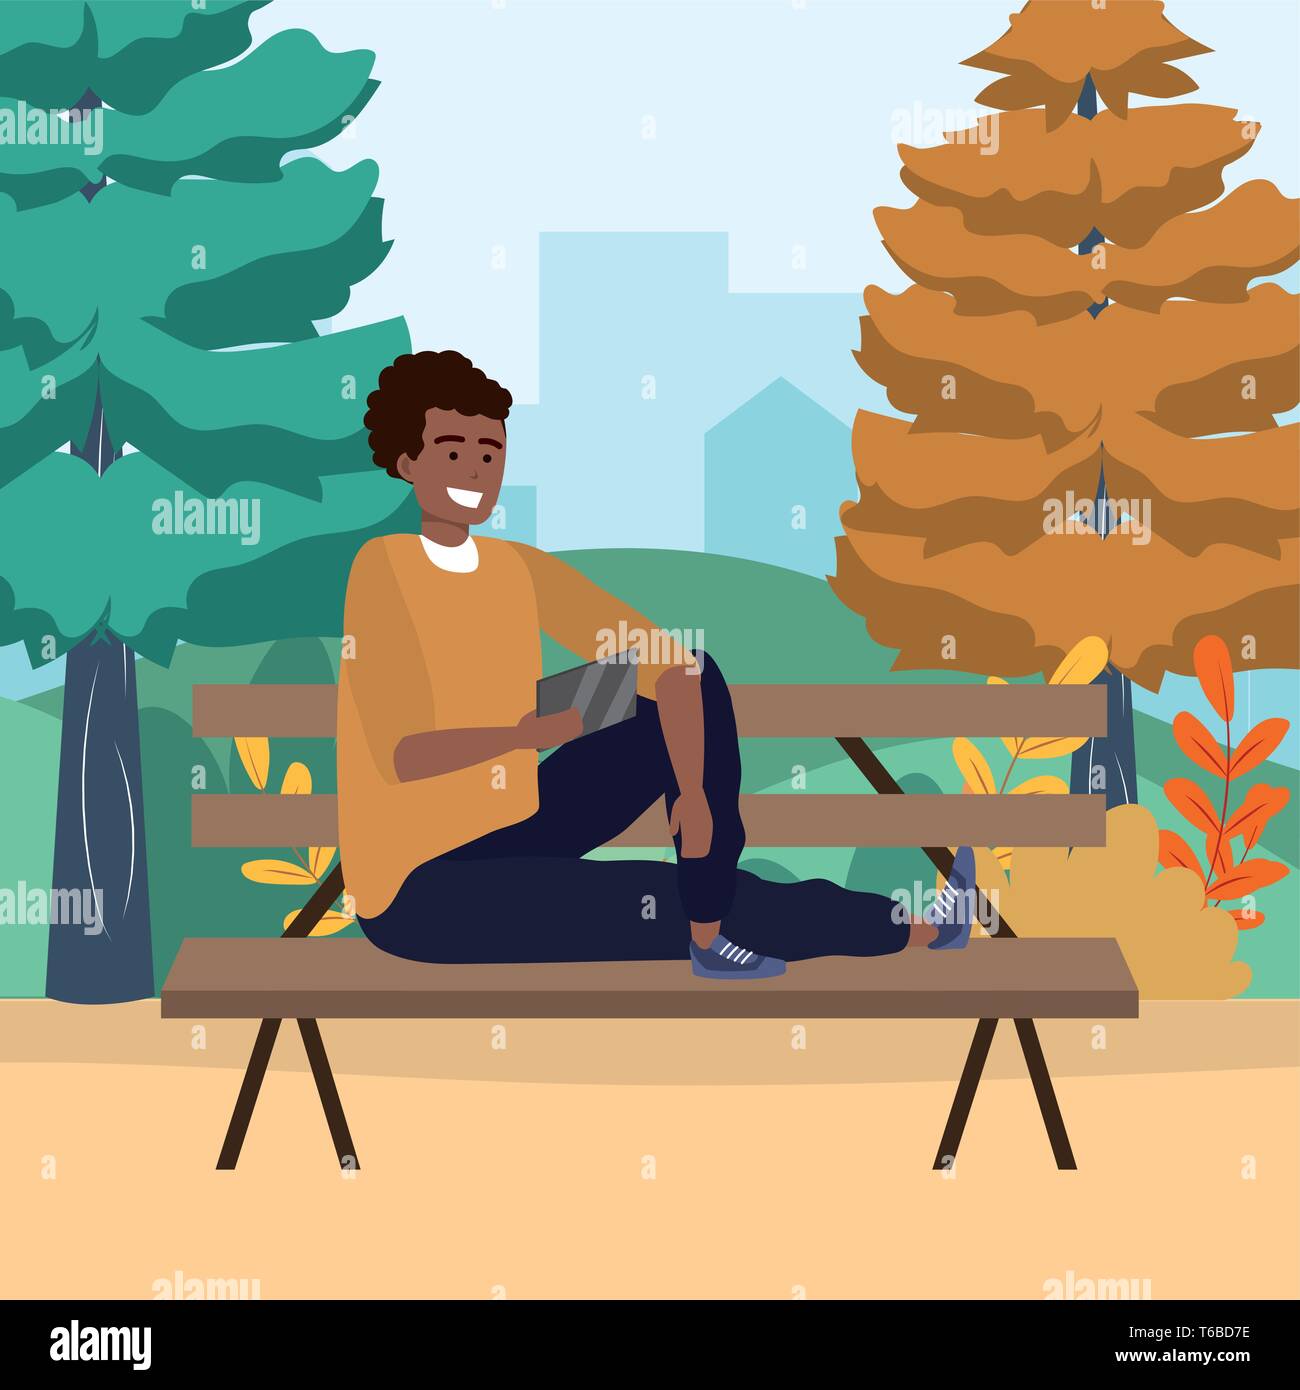 Millennial person stylish outfit sitting in park bench using smartphone texting afro vector illustration graphic design Stock Vector